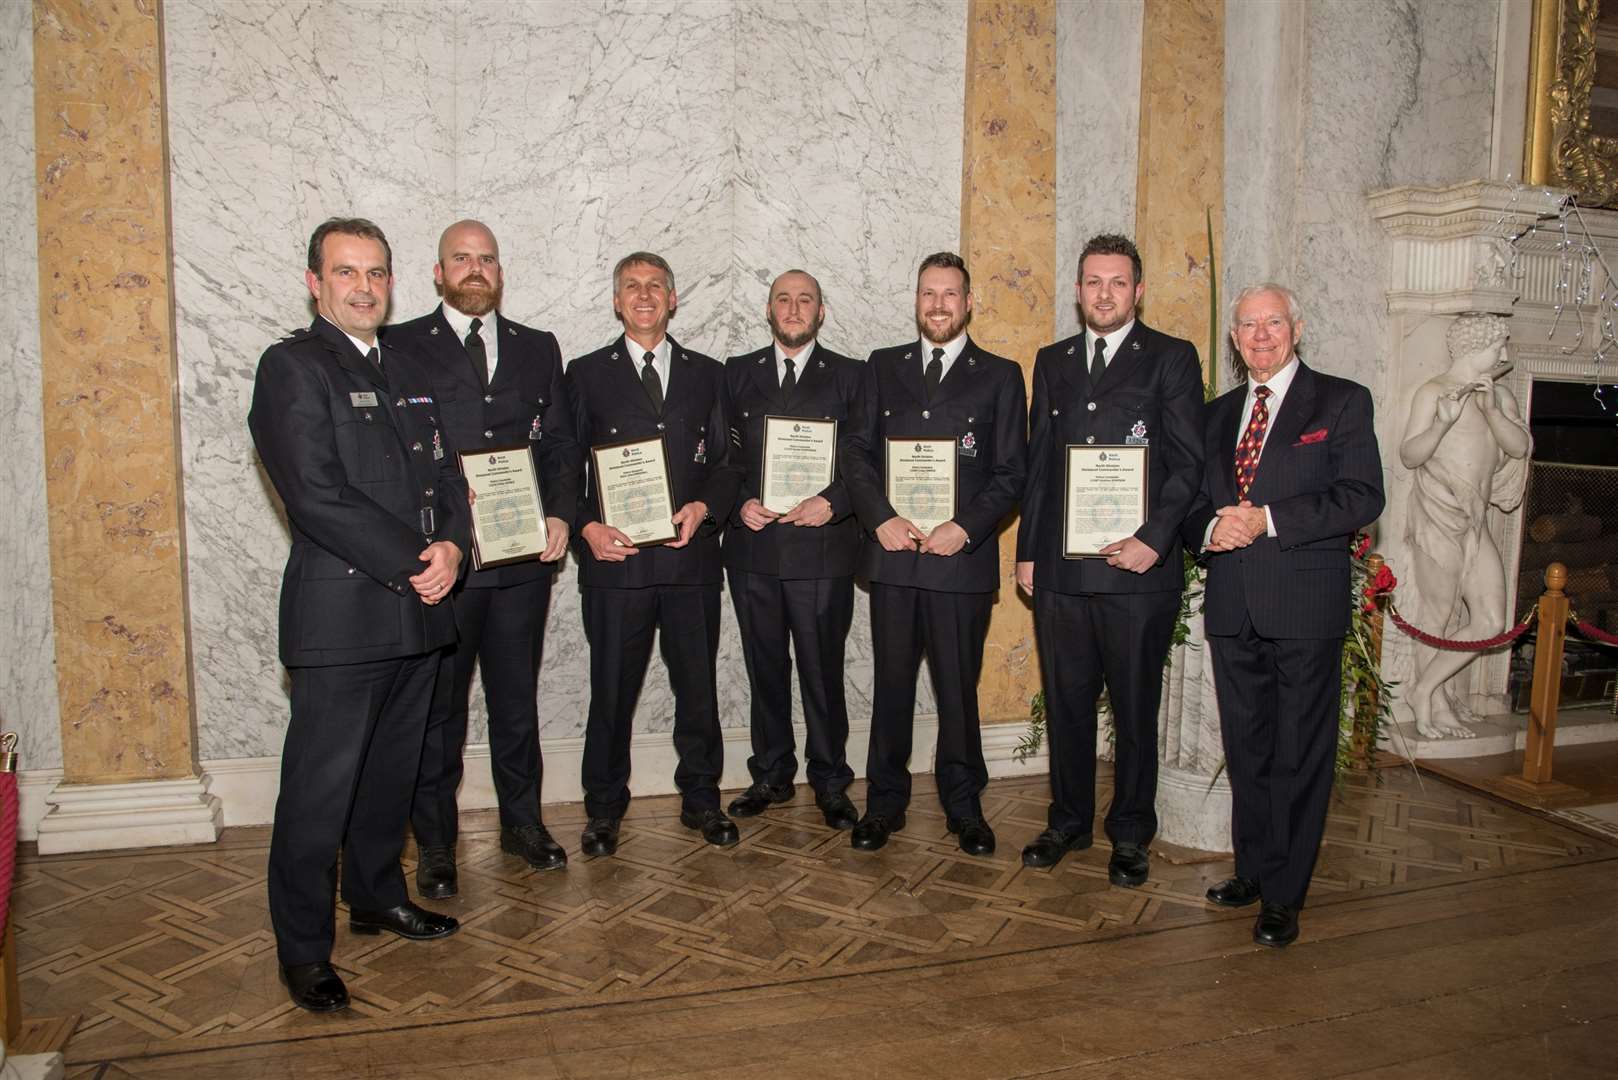 Ch Supt Adrian Futers (left) with the Gravesham Community Policing Team and awards ceremony guest of honour, former area commander Ken Tappenden